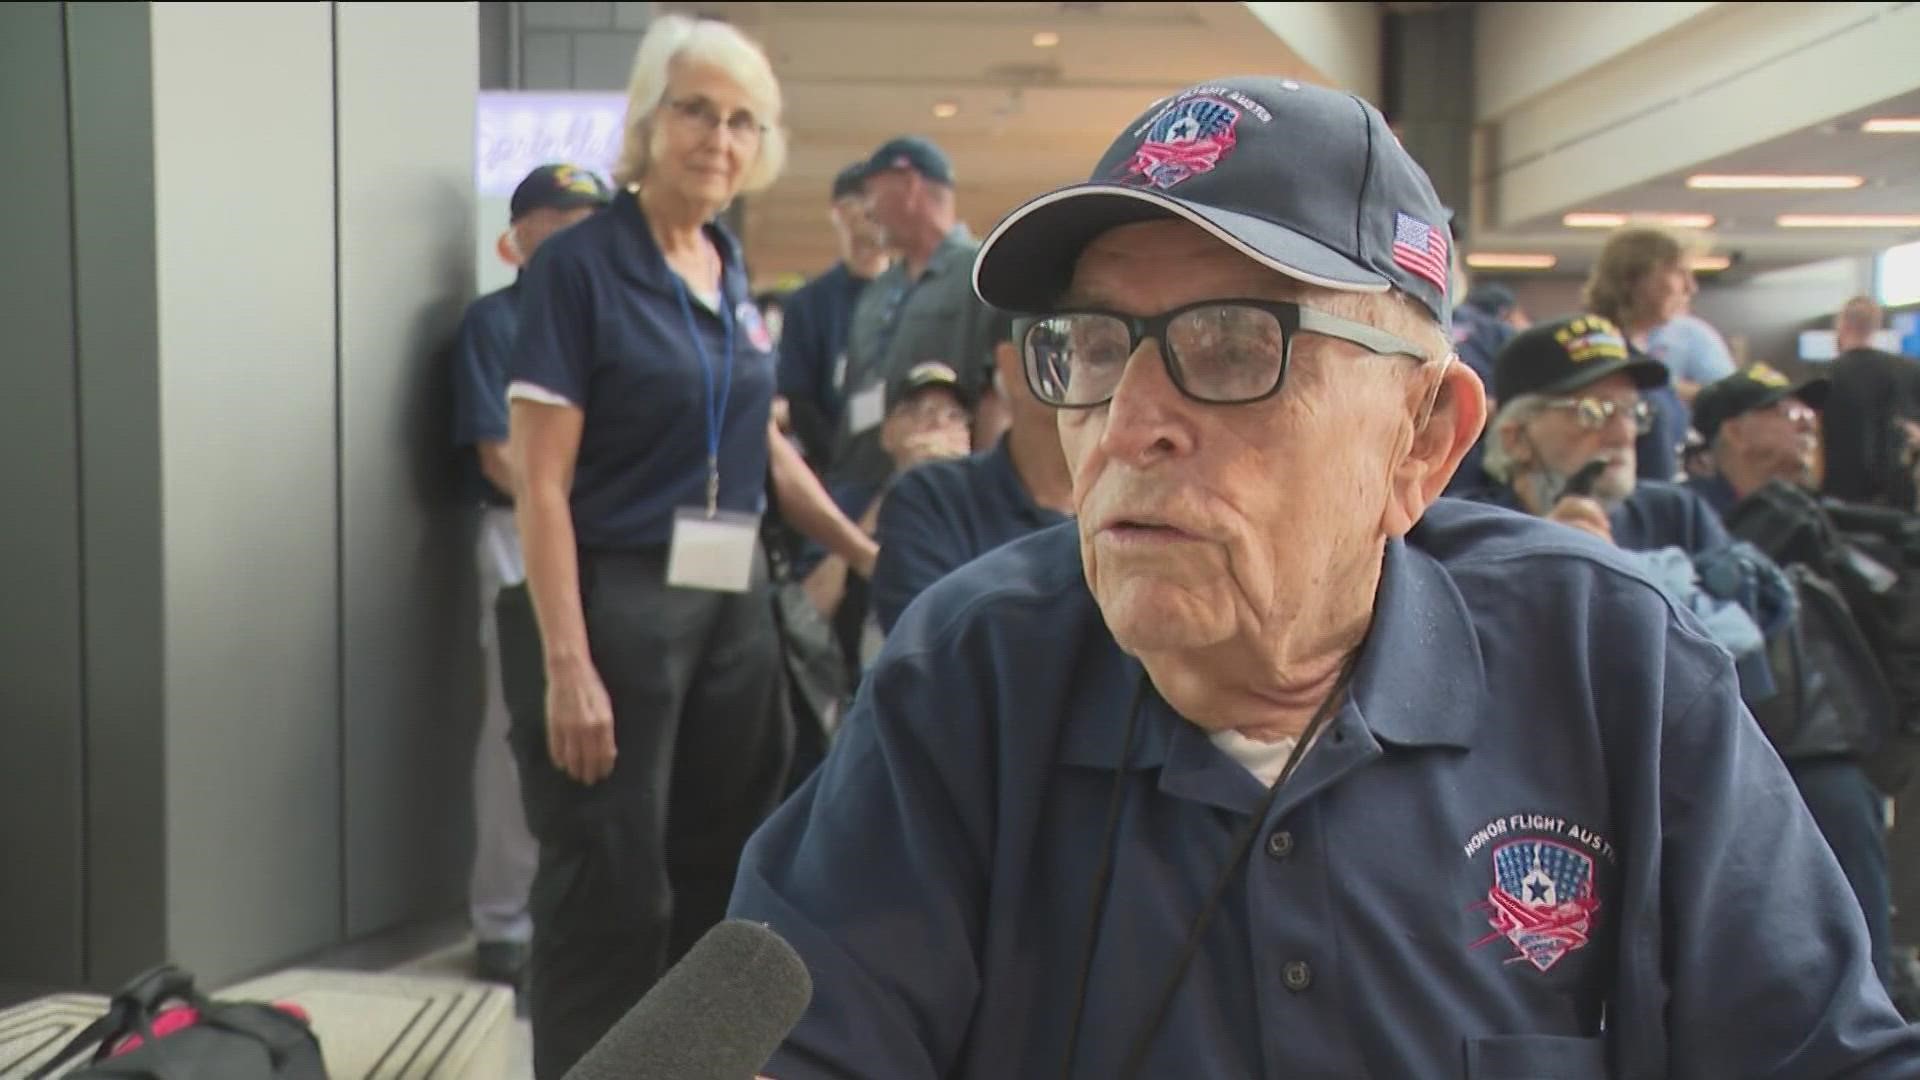 World War II veteran Archie Moczygemba from Taylor connected with the great people at Honor Flight Austin. He joined other veterans on a flight to Washington, D.C.